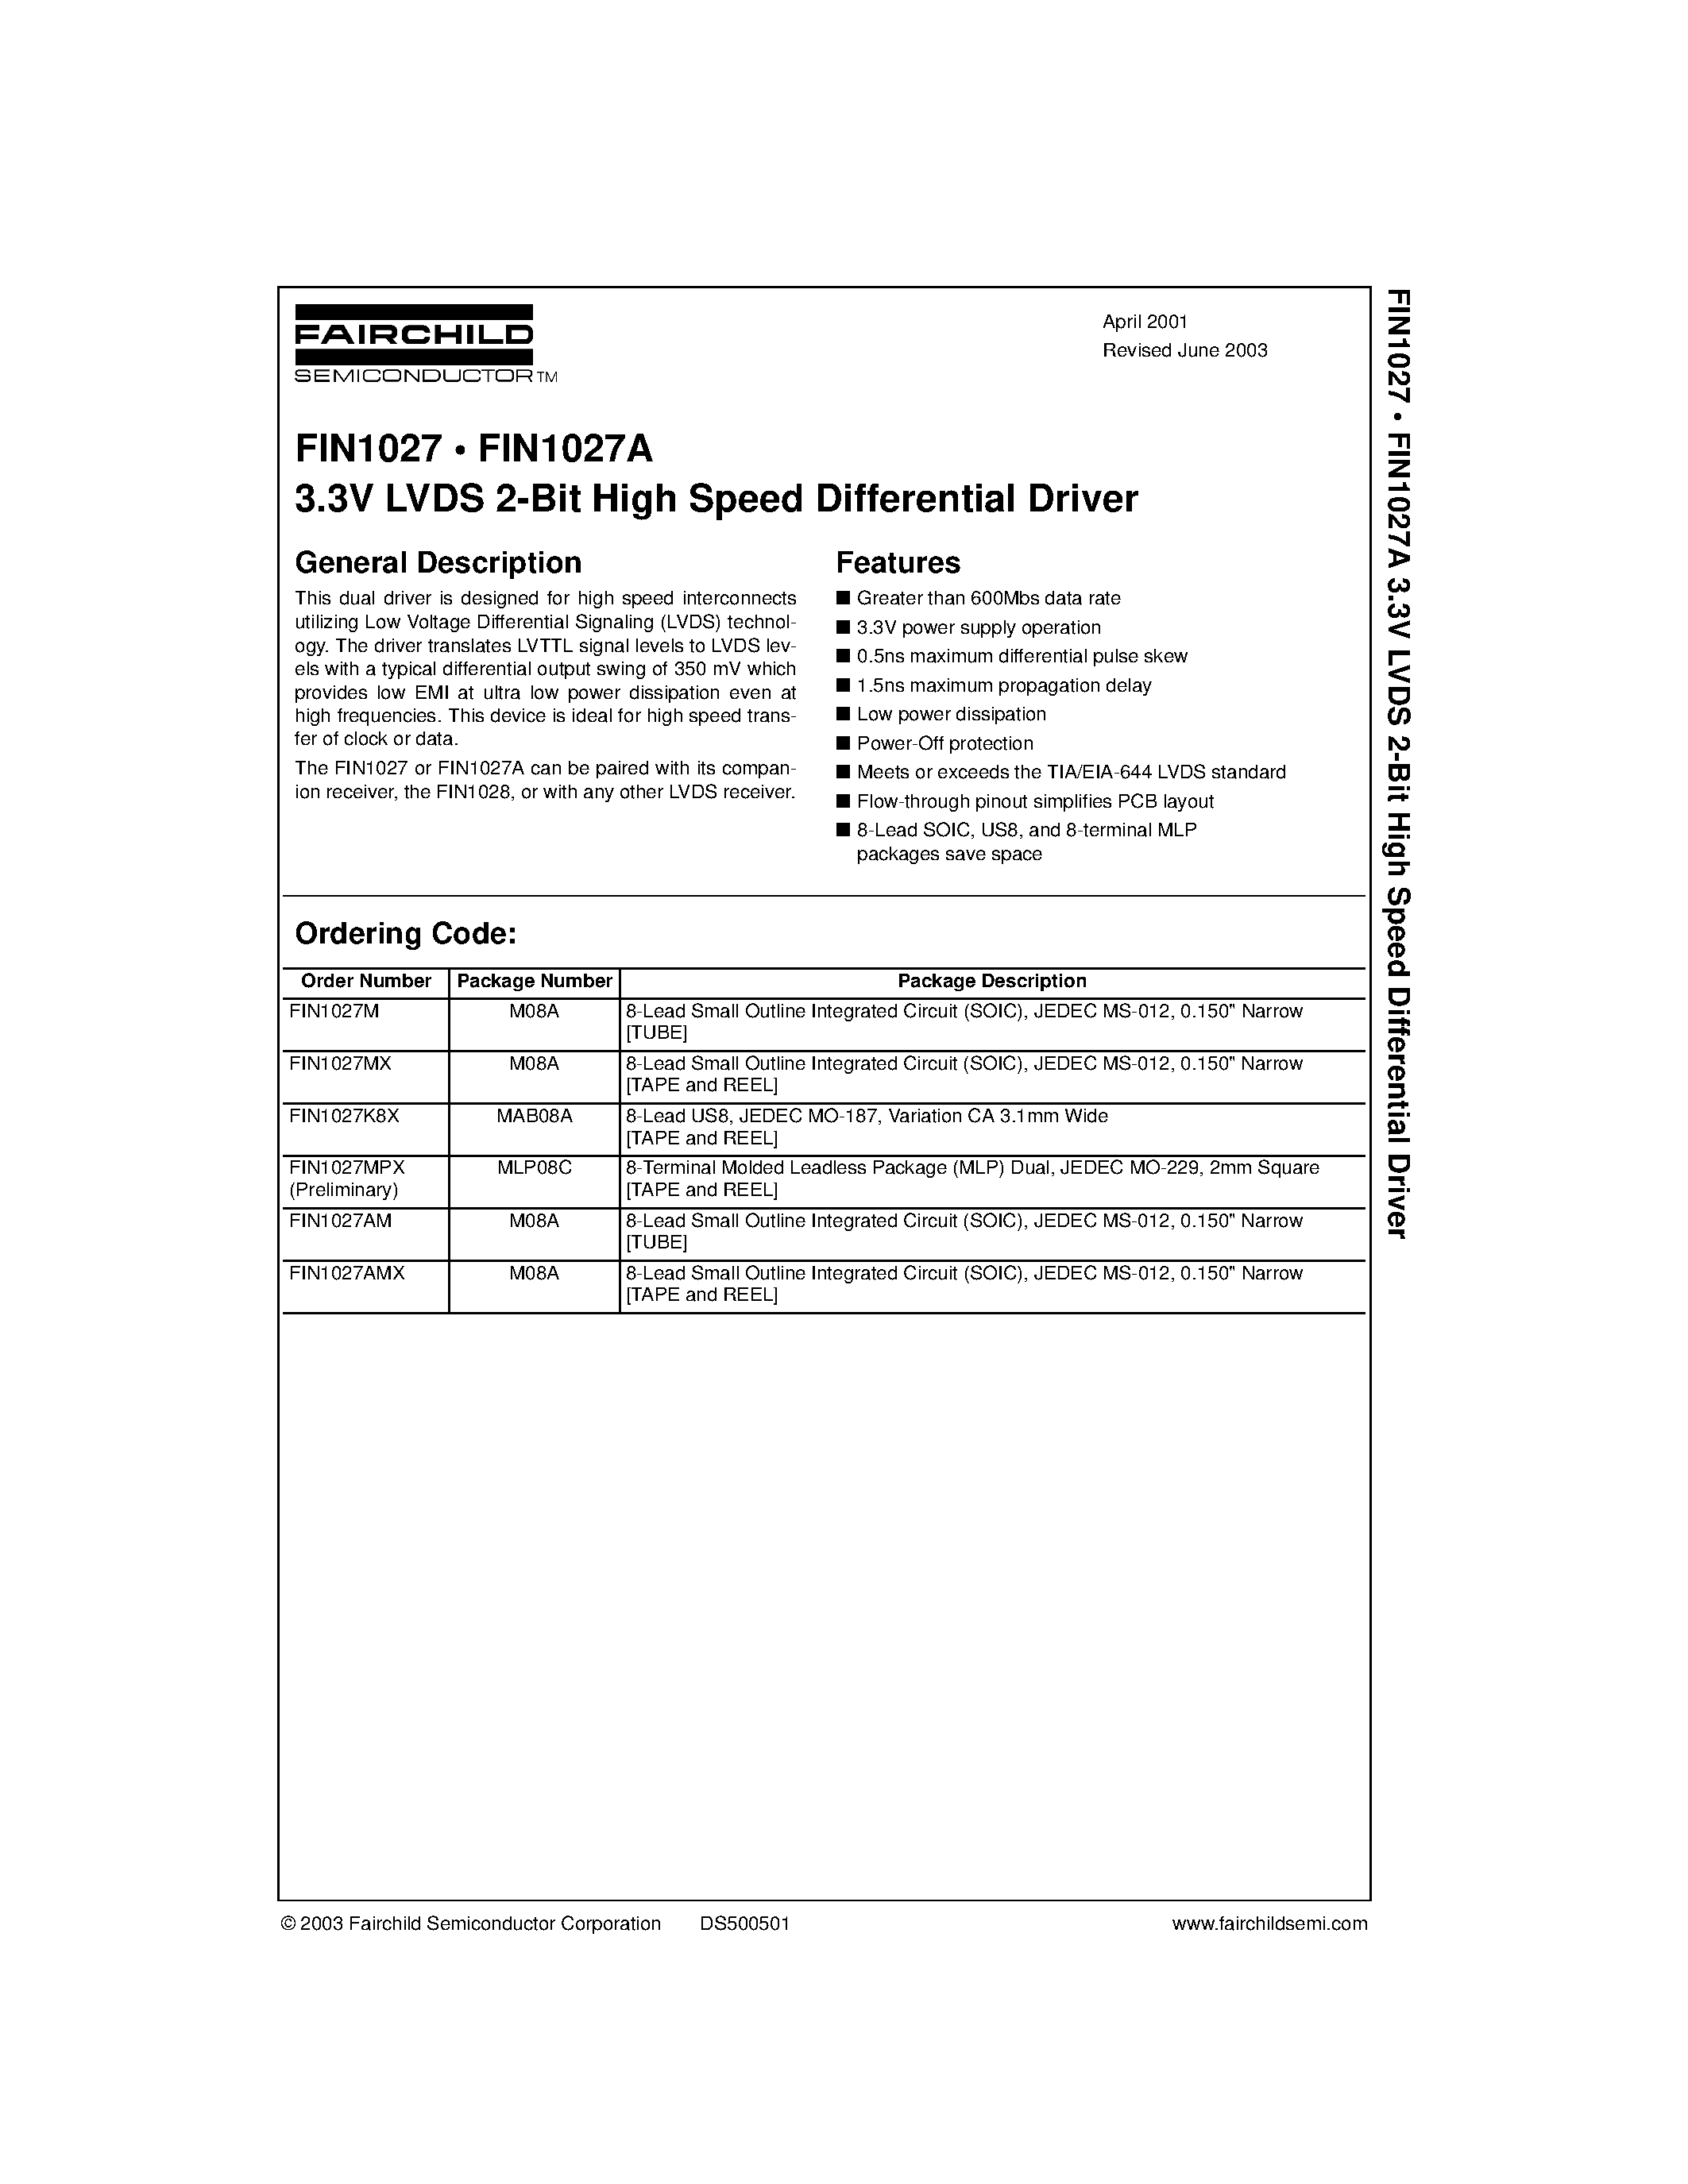 Datasheet FIN1027MPX - 3.3V LVDS 2-Bit High Speed Differential Driver page 1